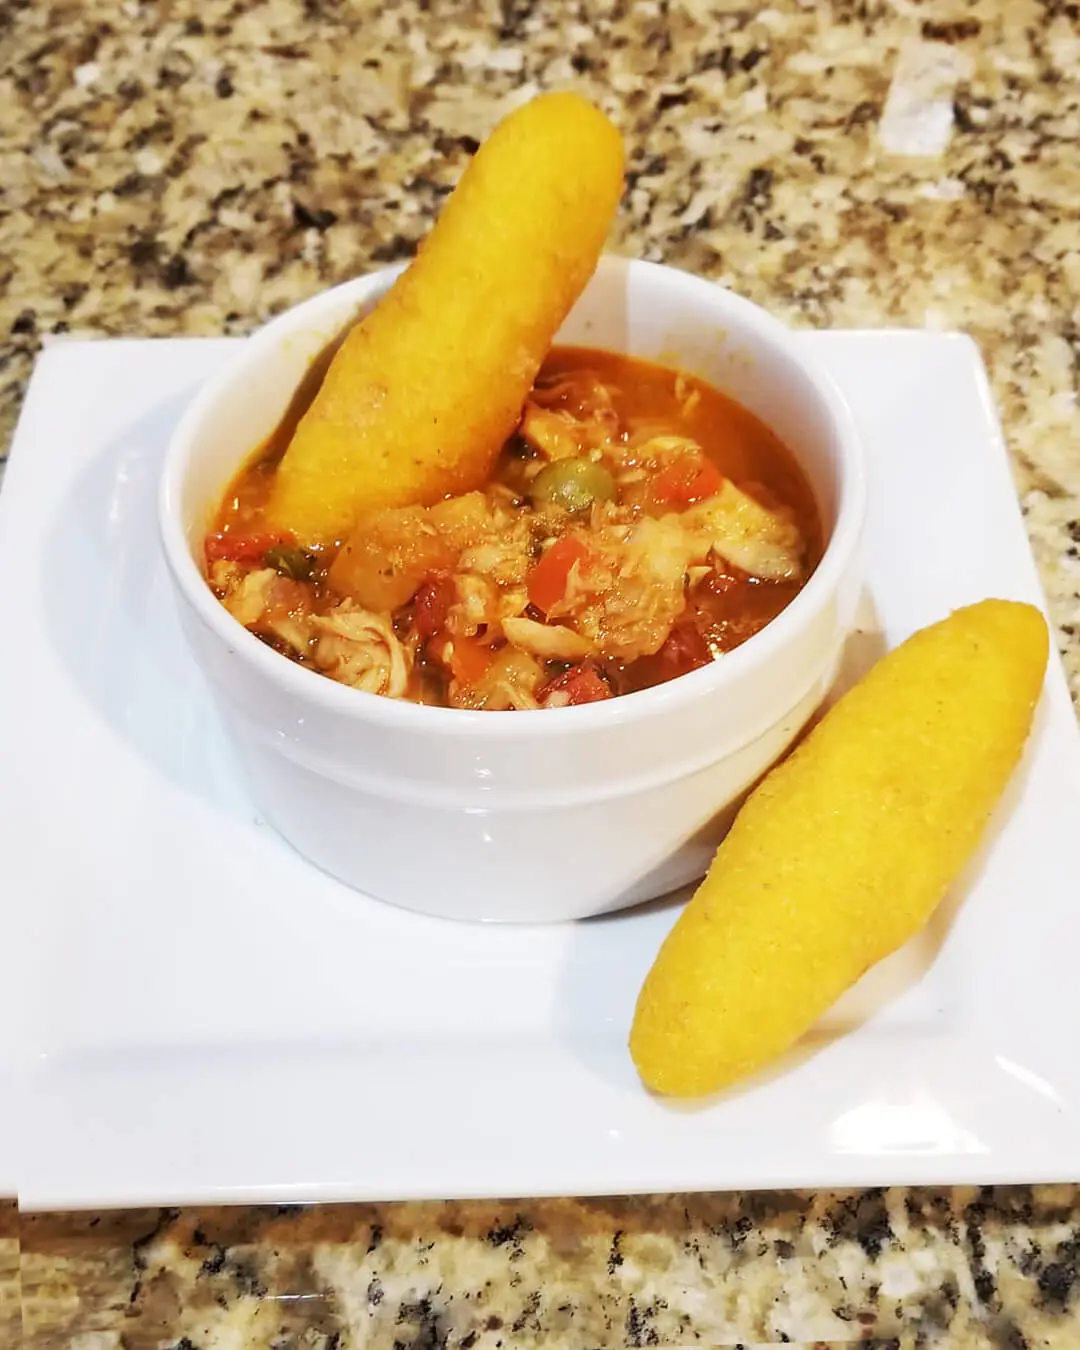 Appetizing plate of salted fish stew, served with cheesy corn fritters